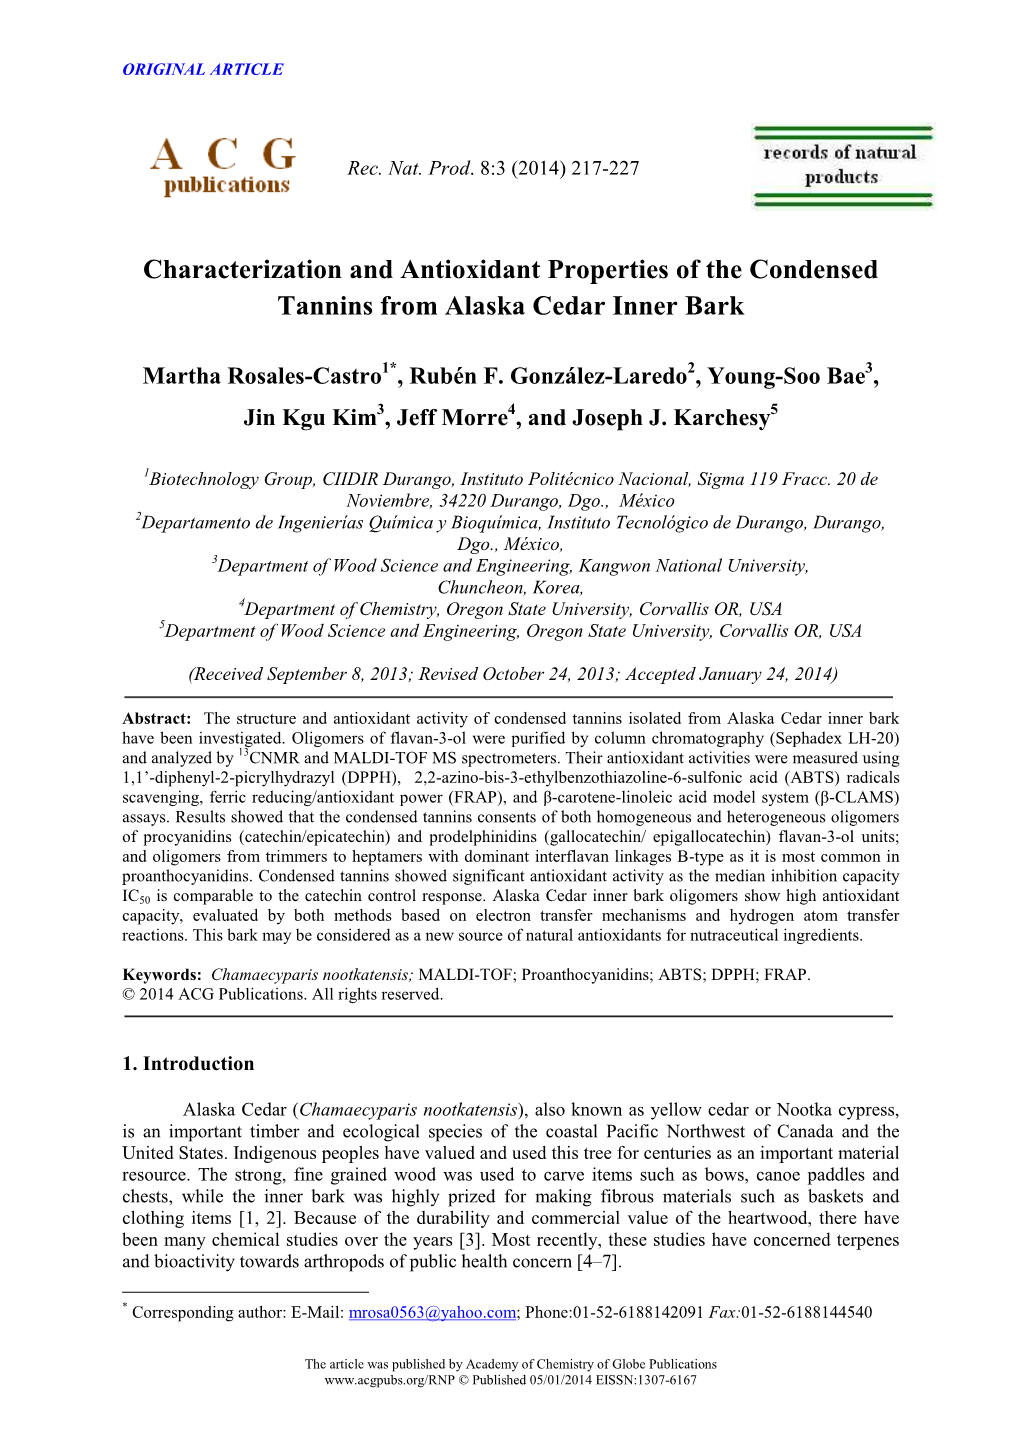 Characterization and Antioxidant Properties of the Condensed Tannins from Alaska Cedar Inner Bark